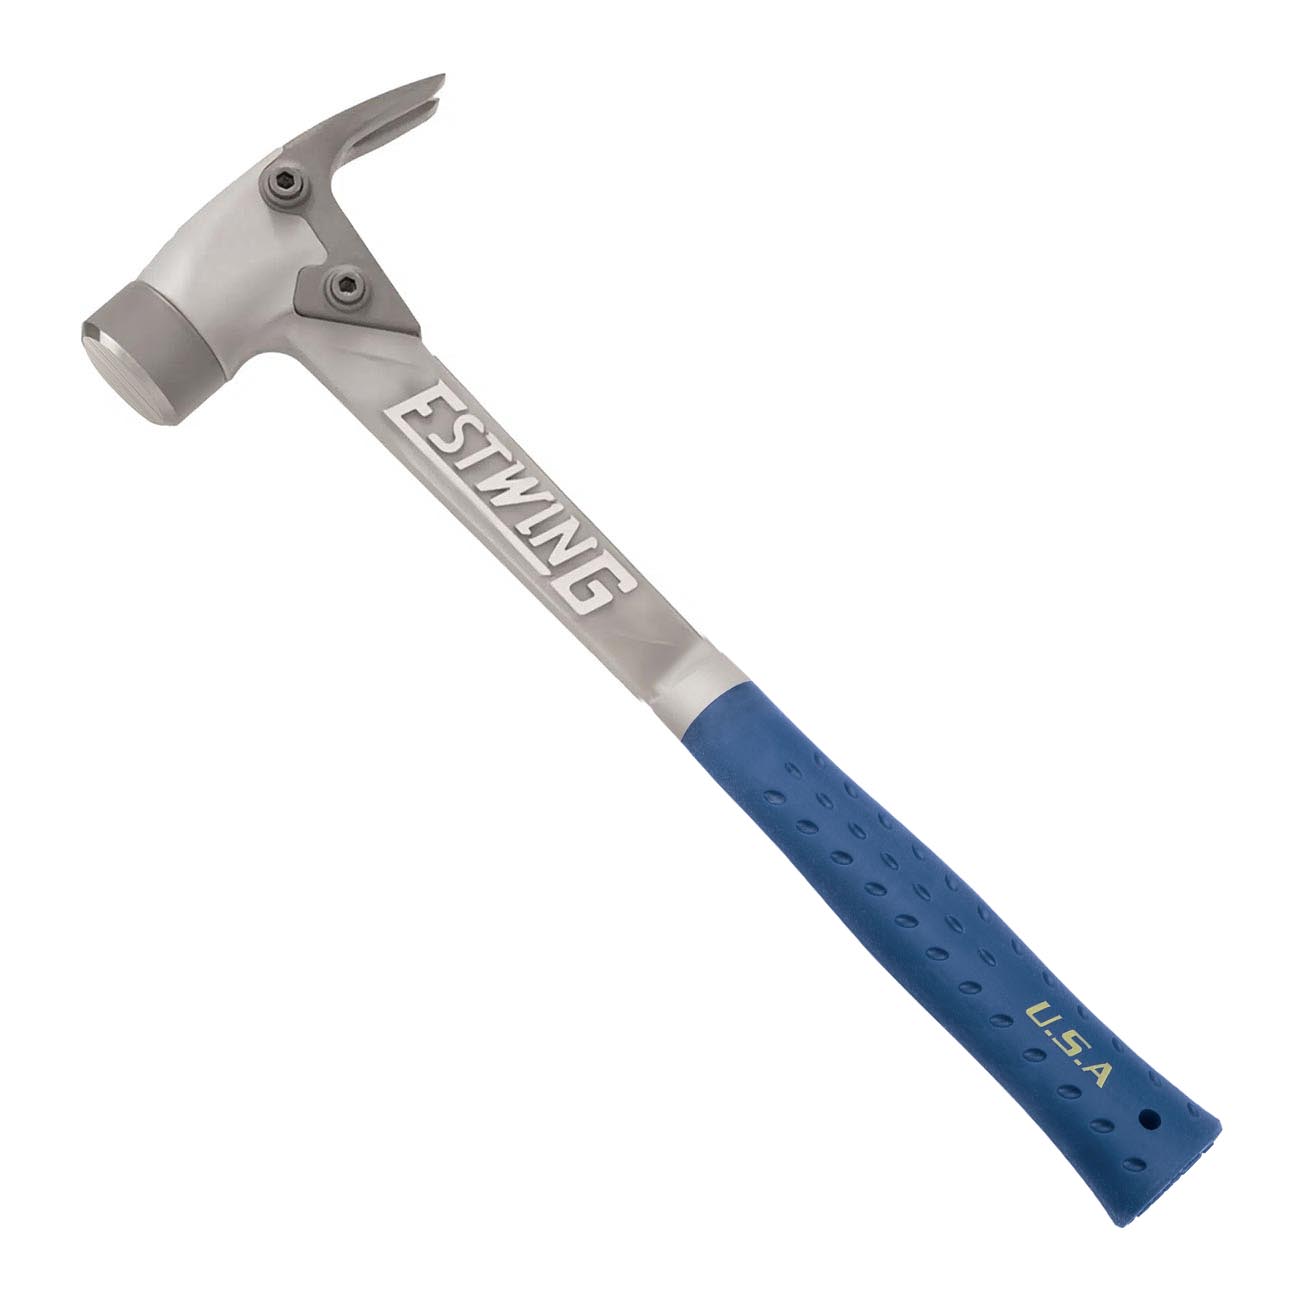 Estwing 14 Oz. Blue Vinyl Grip Aluminum Hammer with Smooth Face